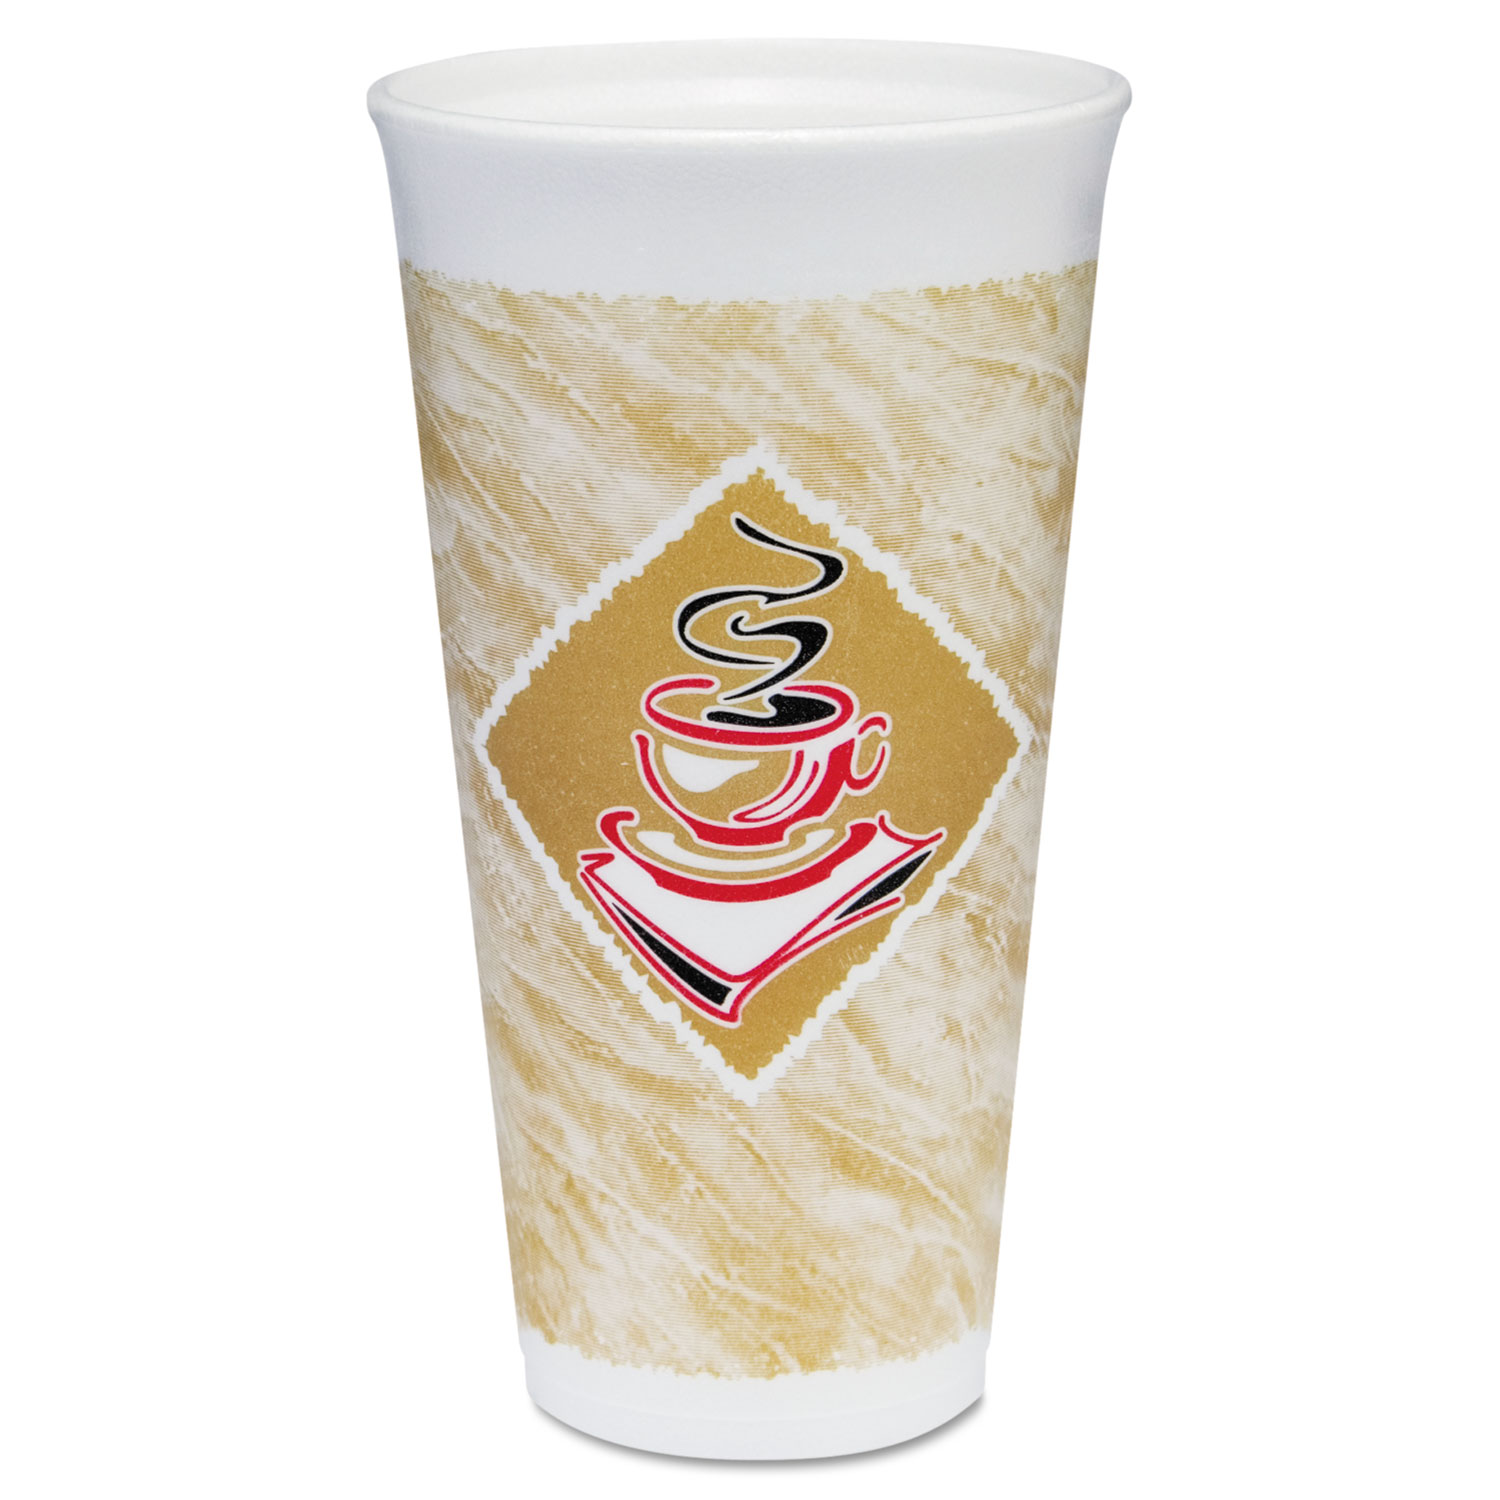  Dart 20X16G Foam Hot/Cold Cups, 20 oz., Café G Design, White/Brown with Red Accents (DCC20X16G) 